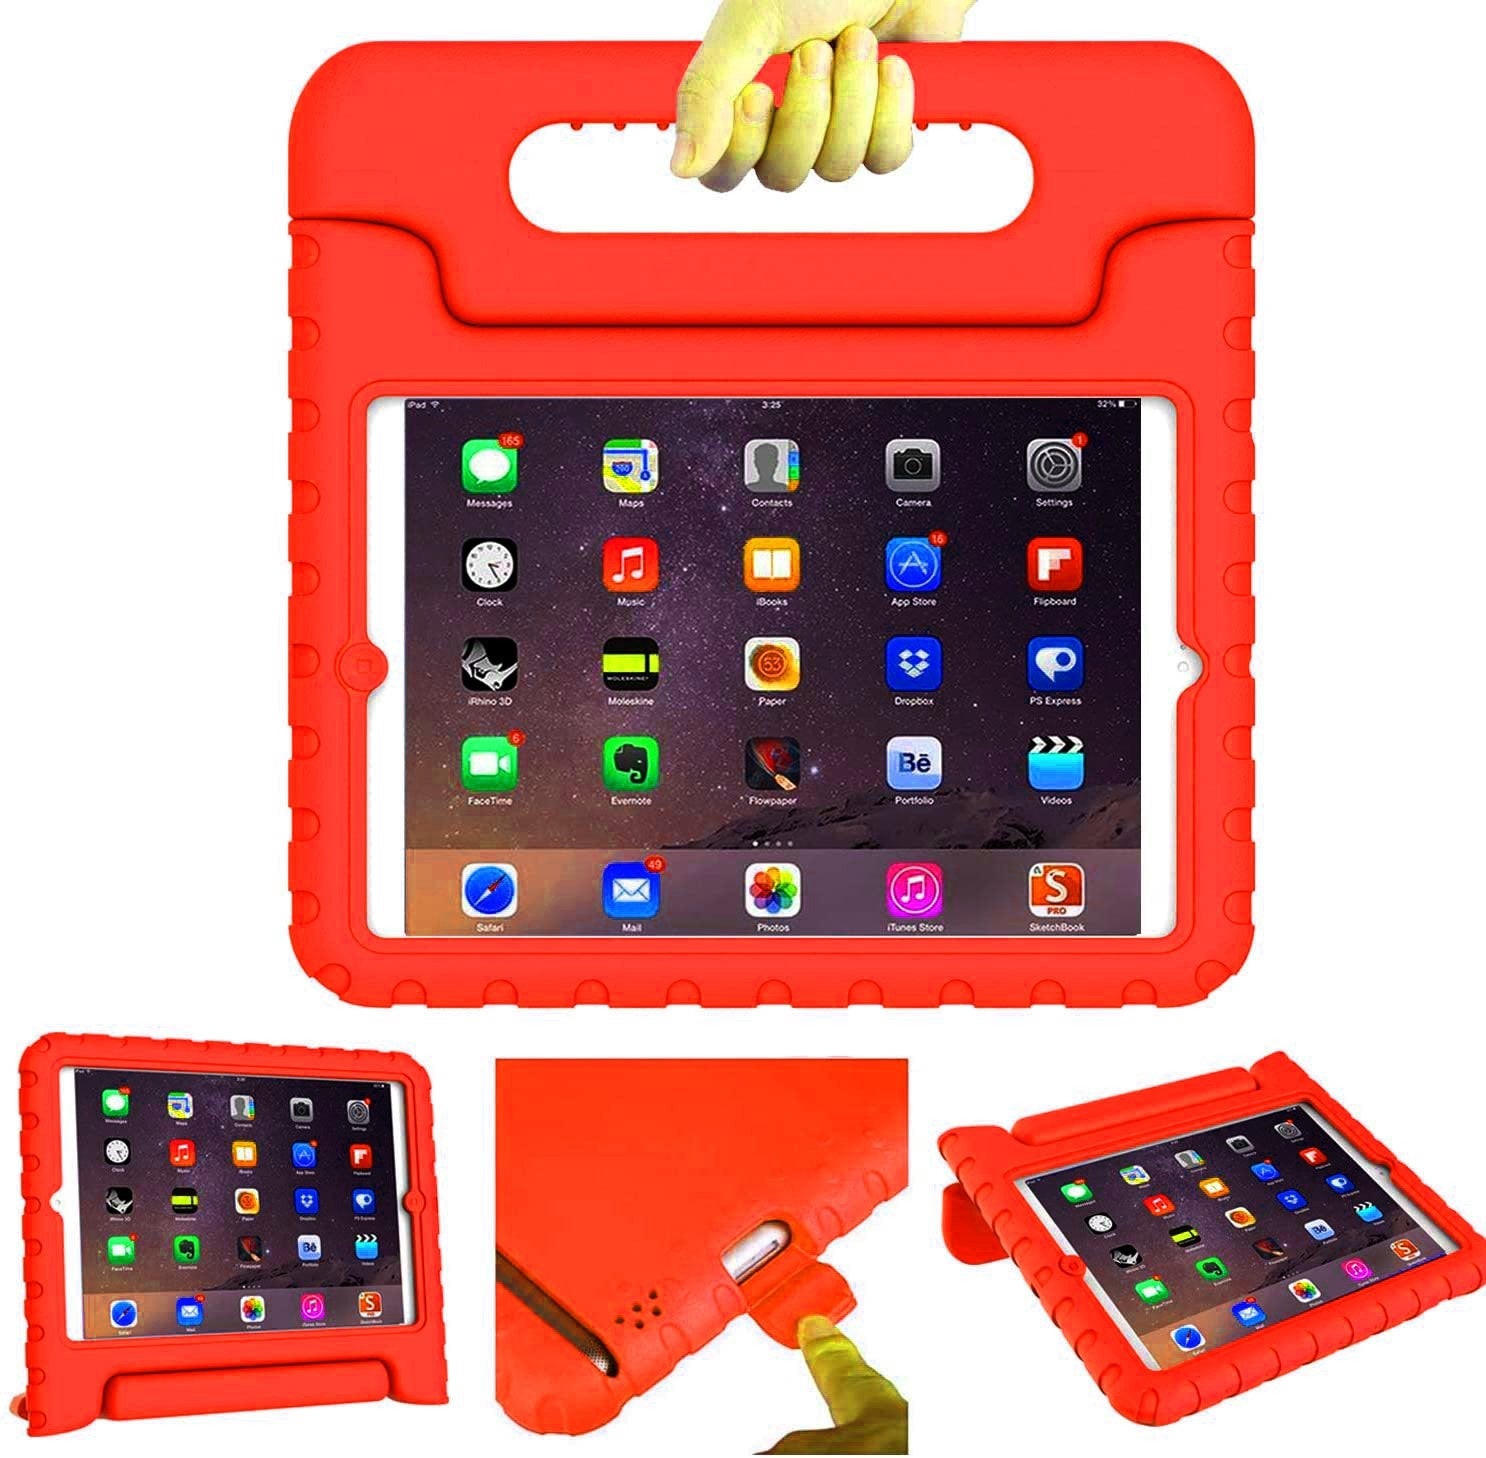 BMOUO iPad 2 3 4 Shockproof Case Light Weight Kids Case Super Protection Cover Handle Stand Case - e4cents